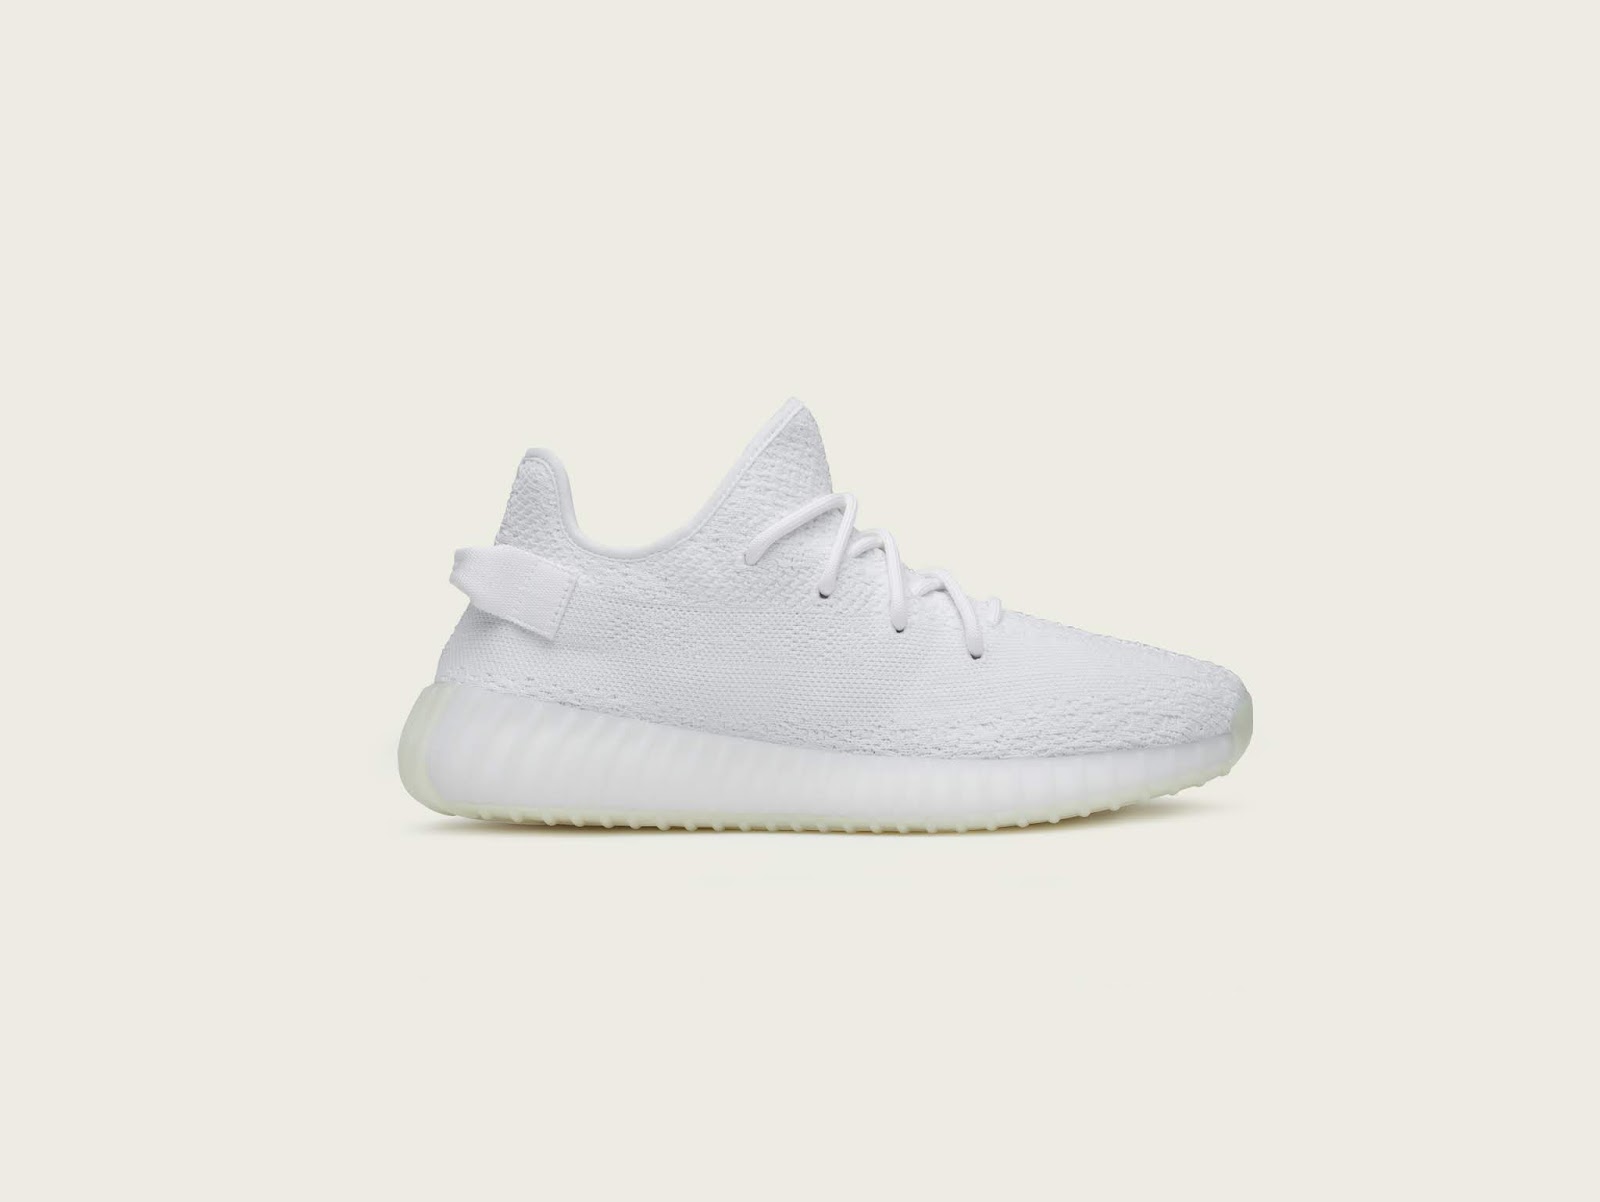 Swag Craze: adidas Yeezy Boost 350 V2 'Triple White' drops today!